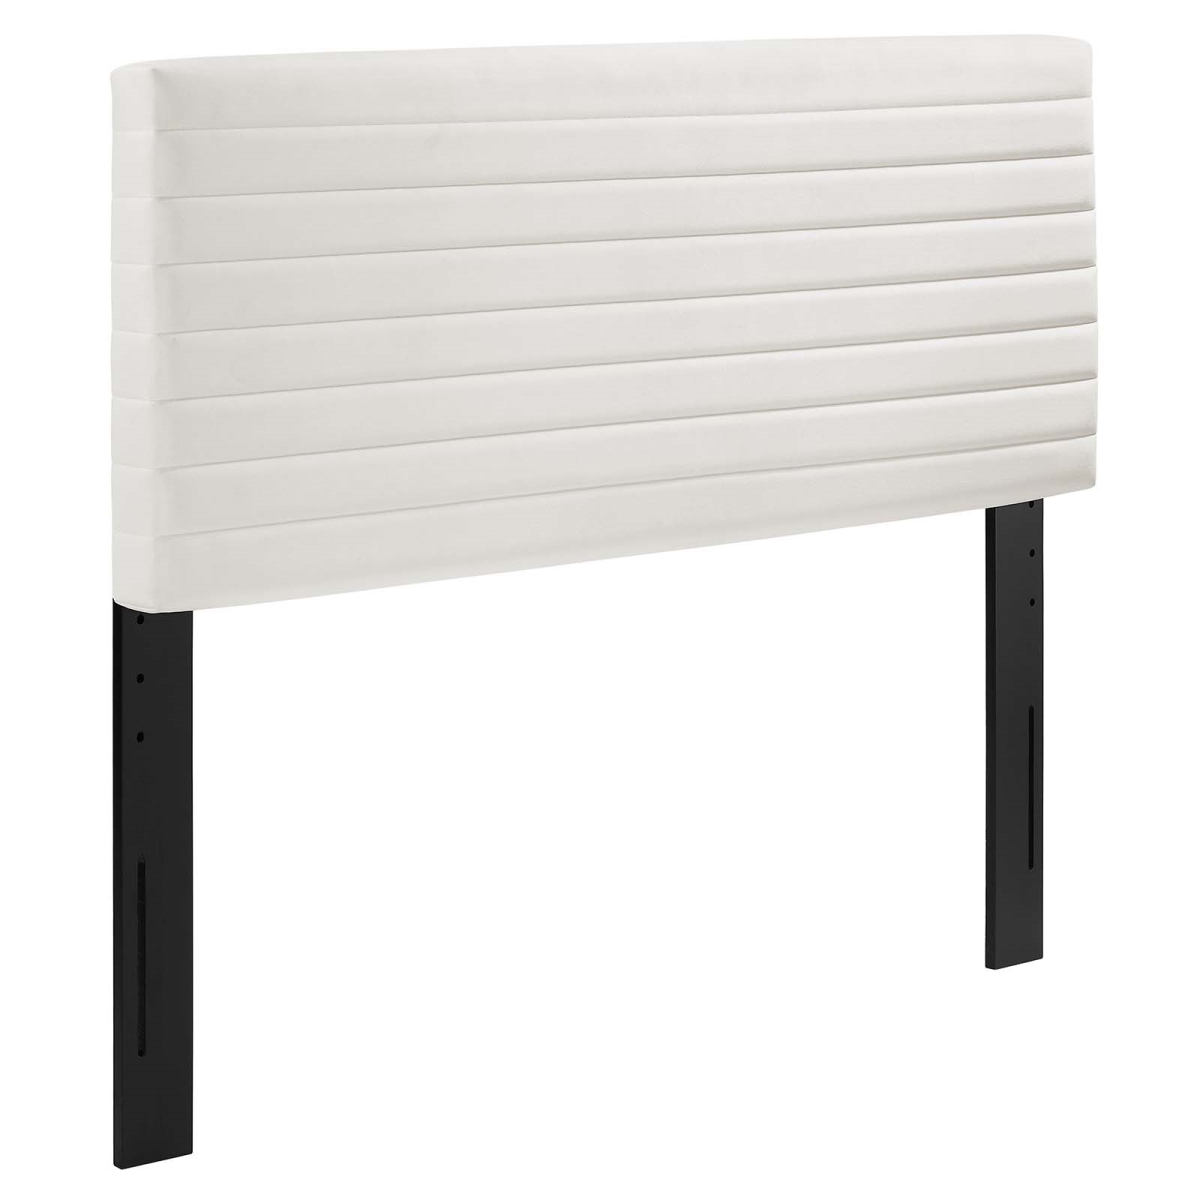 Picture of Modway Furniture MOD-7023-WHI 23 x 39.5 x 3.5 in. Tranquil Twin Size Headboard, White